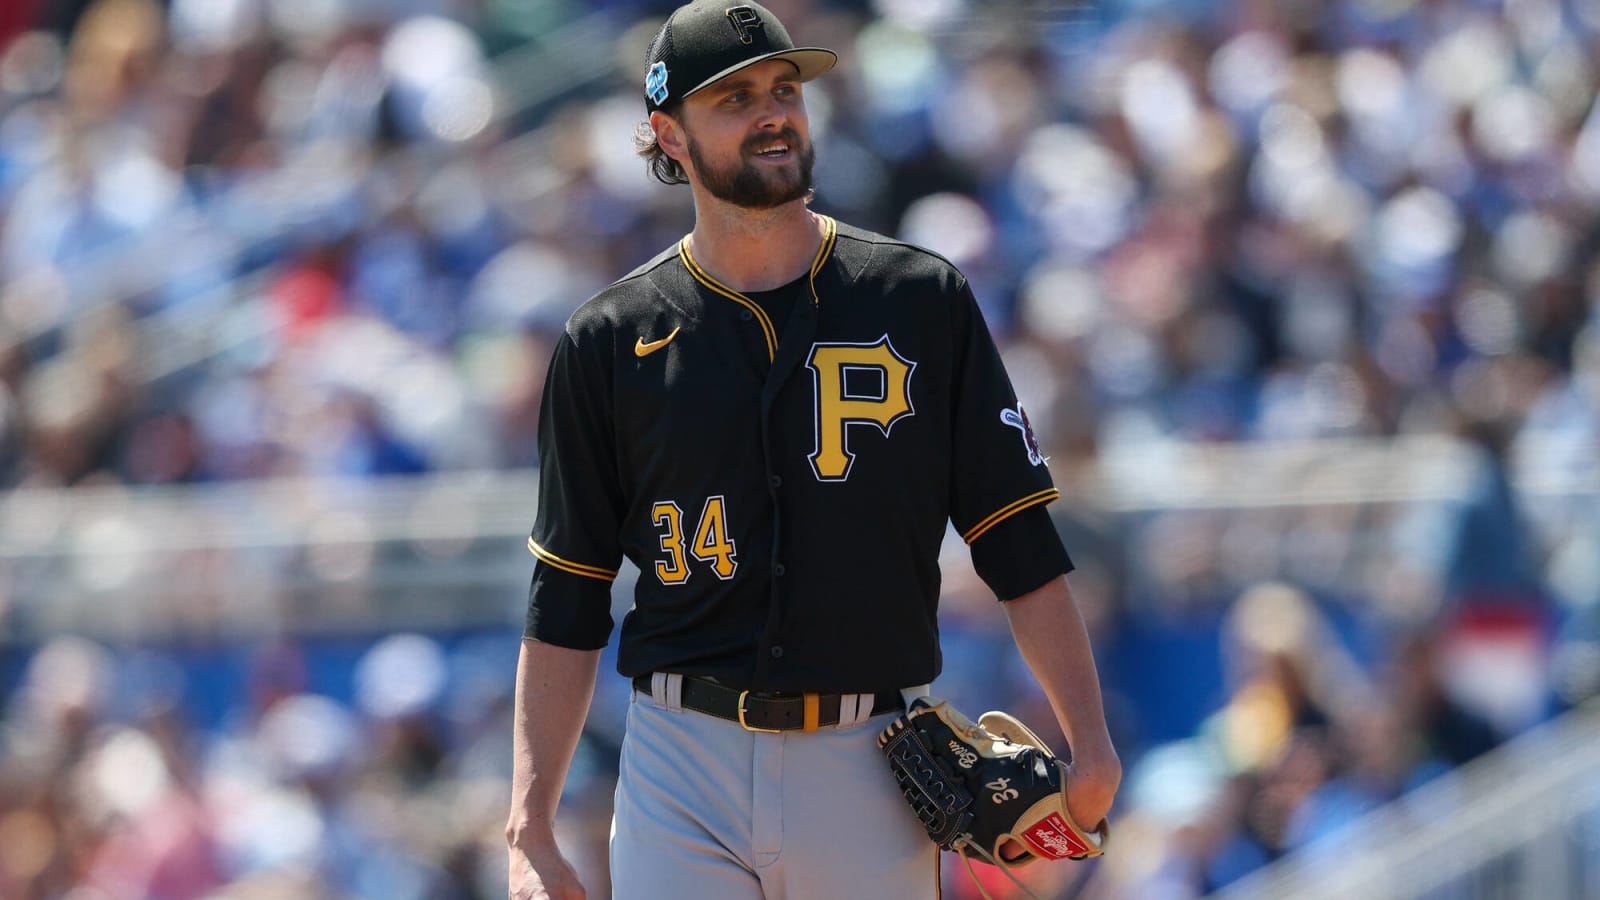 Pirates All 40: JT Brubaker’s Potential Breakout Halted by Lost Season